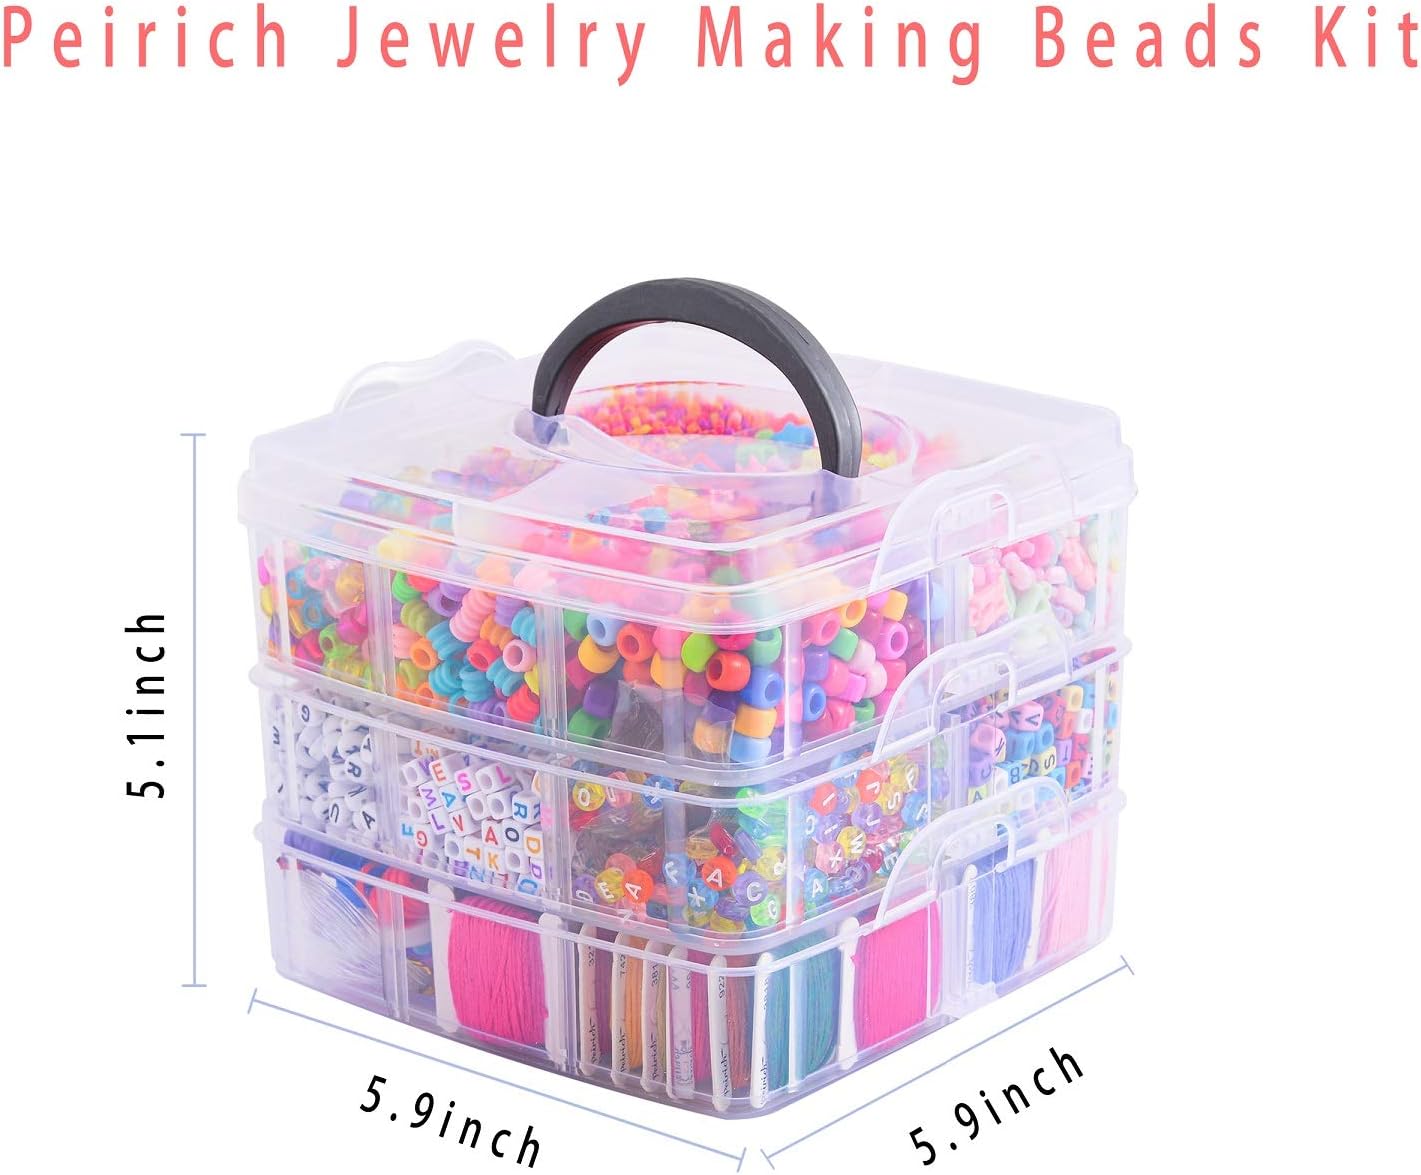 Peirich Jewelry Making Bead Kits, Includes 44 Colors Embroidery Floss with  3-Tier Organizer Storage Box with Threads, Over 4900 Beads for Friendship  Bracelets, Jewelry Making Christmas Birthday Gift 